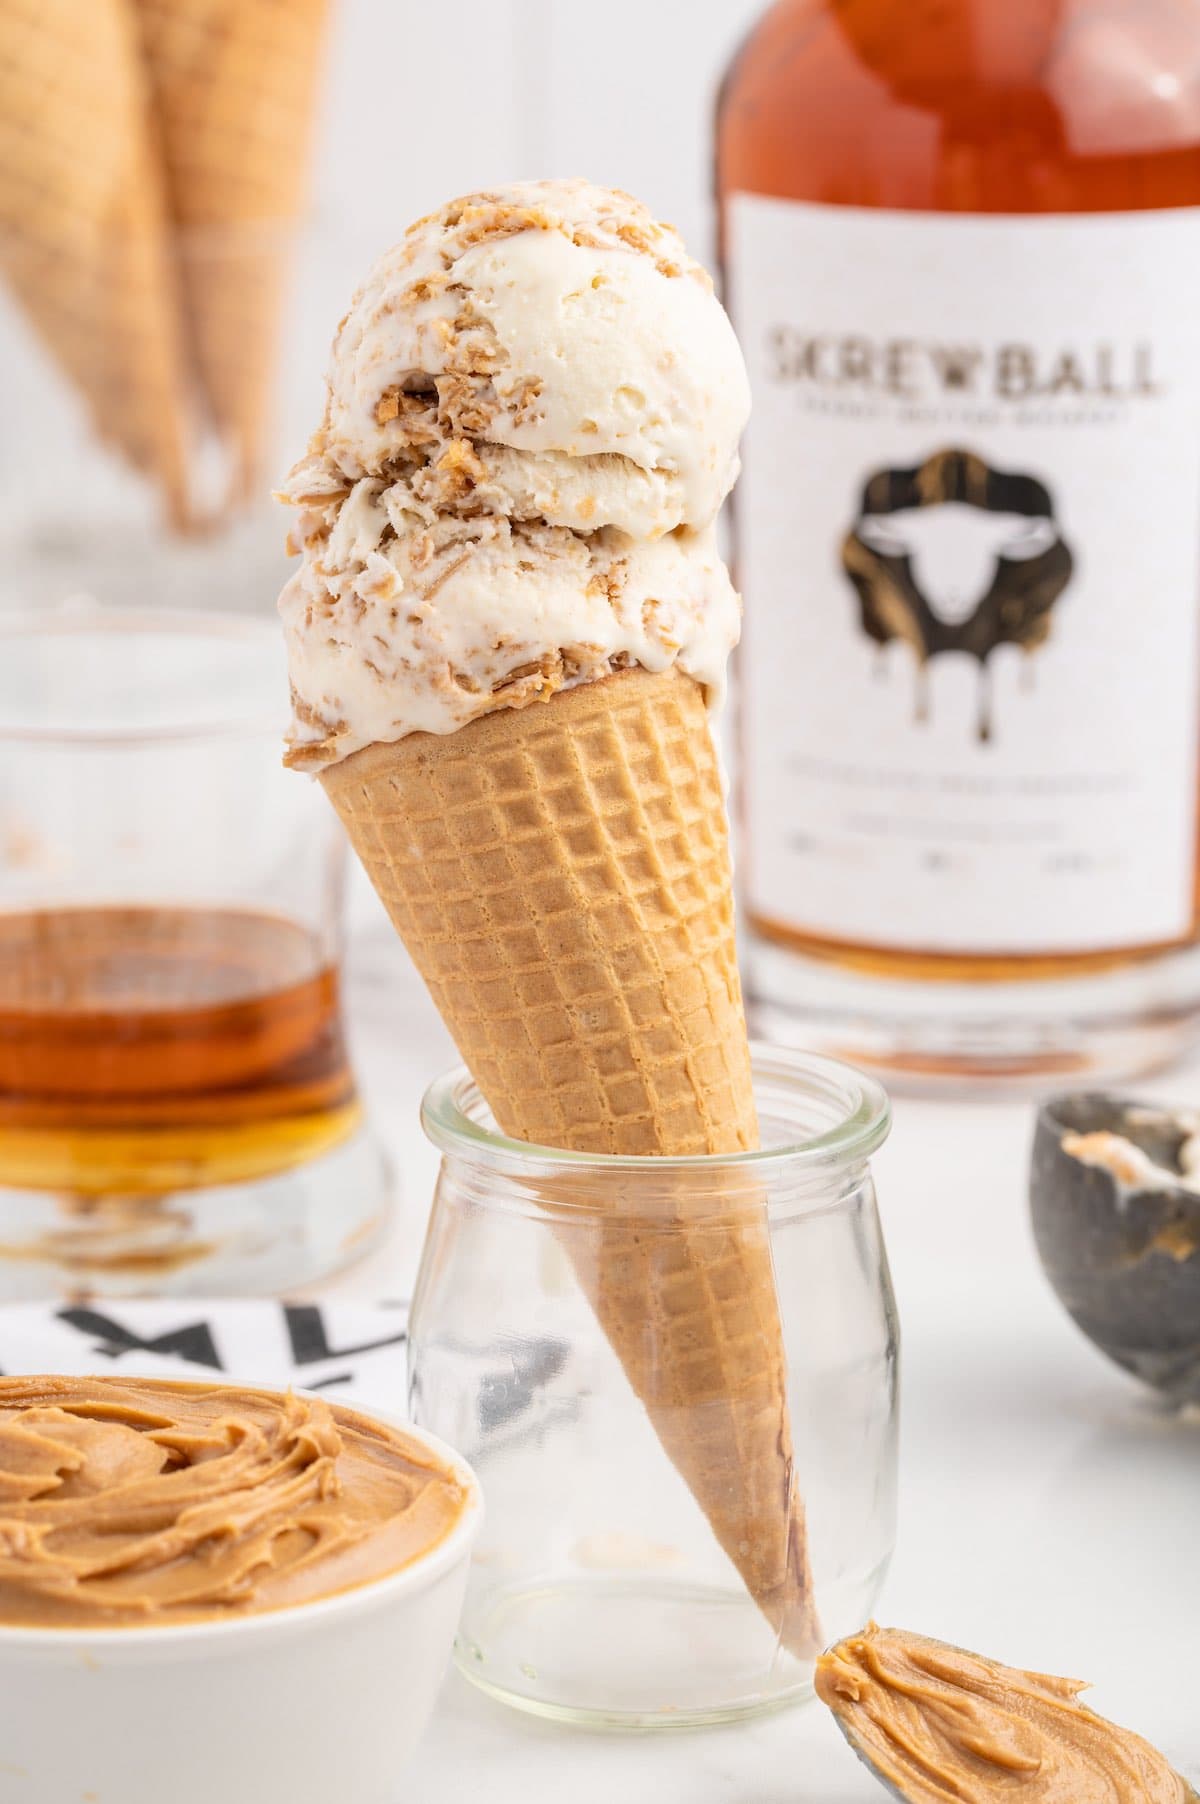 Skrewball Whiskey Ice Cream in a cone.